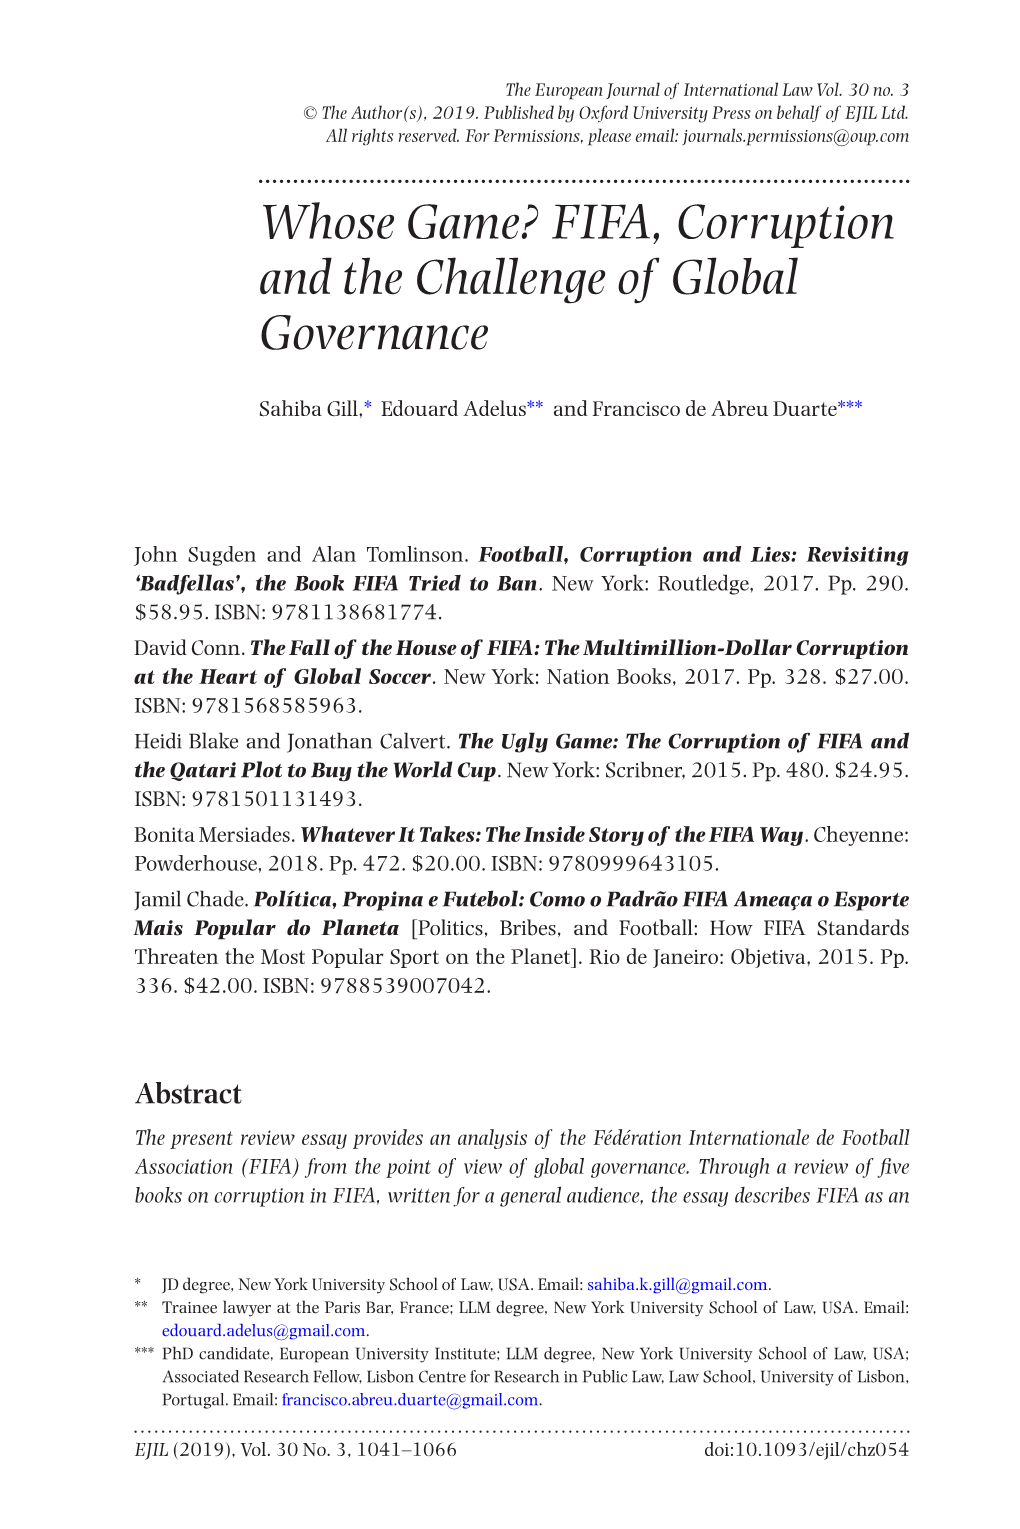 Whose Game? FIFA, Corruption and the Challenge of Global Governance